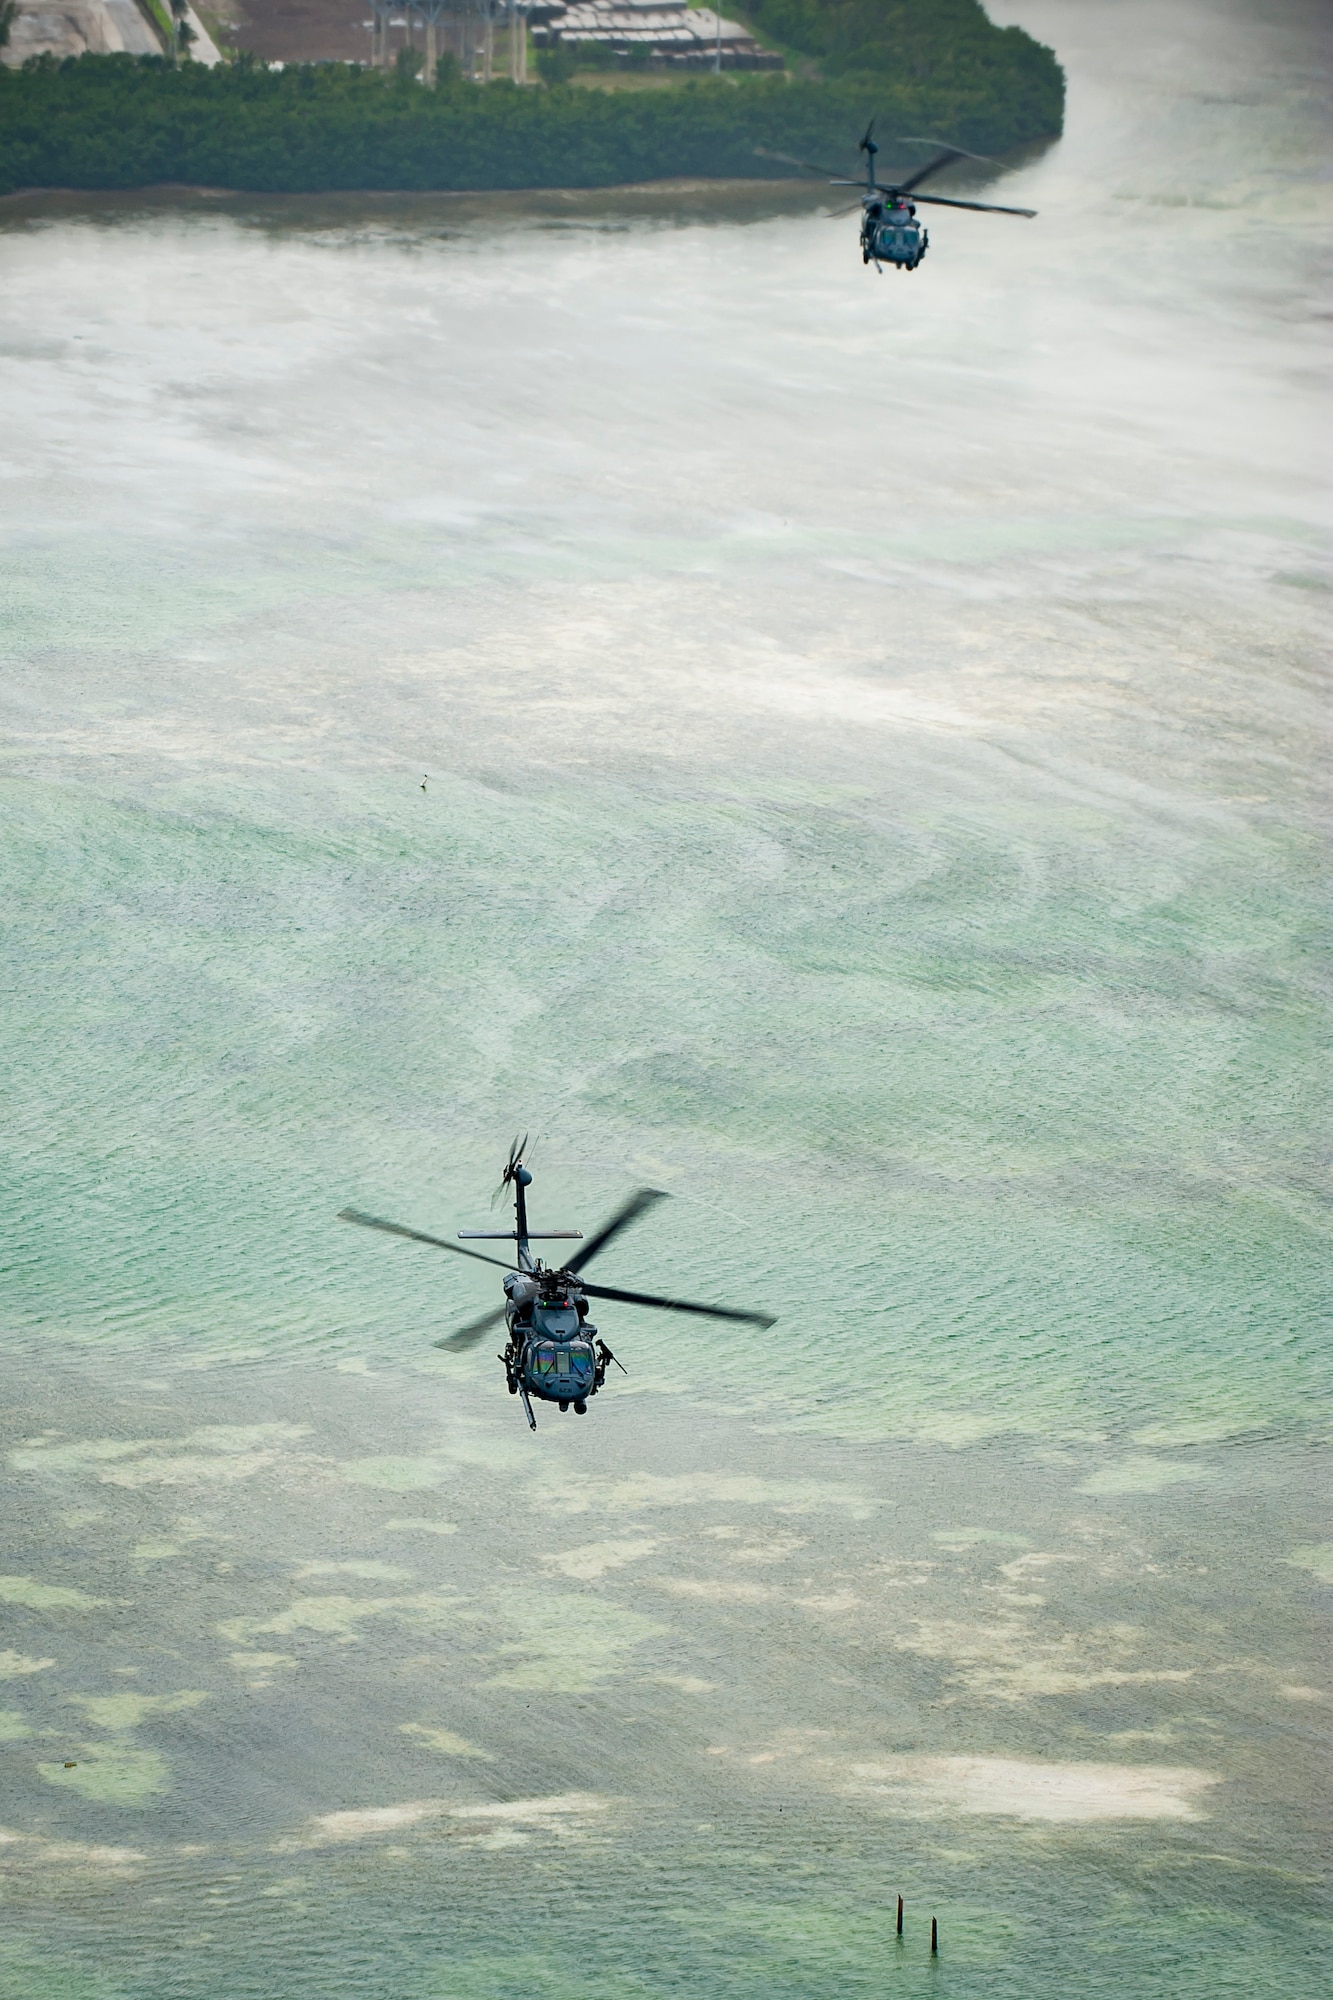 Air Force Reserve Citizen Airmen from the 301st Rescue Squadron out of Patrick Air Force Base in Cocoa Beach, Florida fly near Miami Beach aboard an HH-60G Pave Hawk helicopter on May 25th, 2018 during a practice run for the 2nd annual Salute to American Heroes Air and Sea Show over Miami Beach, Florida.  This two-day event showcases military fighter jets and other aircraft and equipment from all branches of the United States military in observance of Memorial Day, honoring servicemembers who have made the ultimate sacrifice. (U.S. Air Force photo/Staff Sgt. Jared Trimarchi)